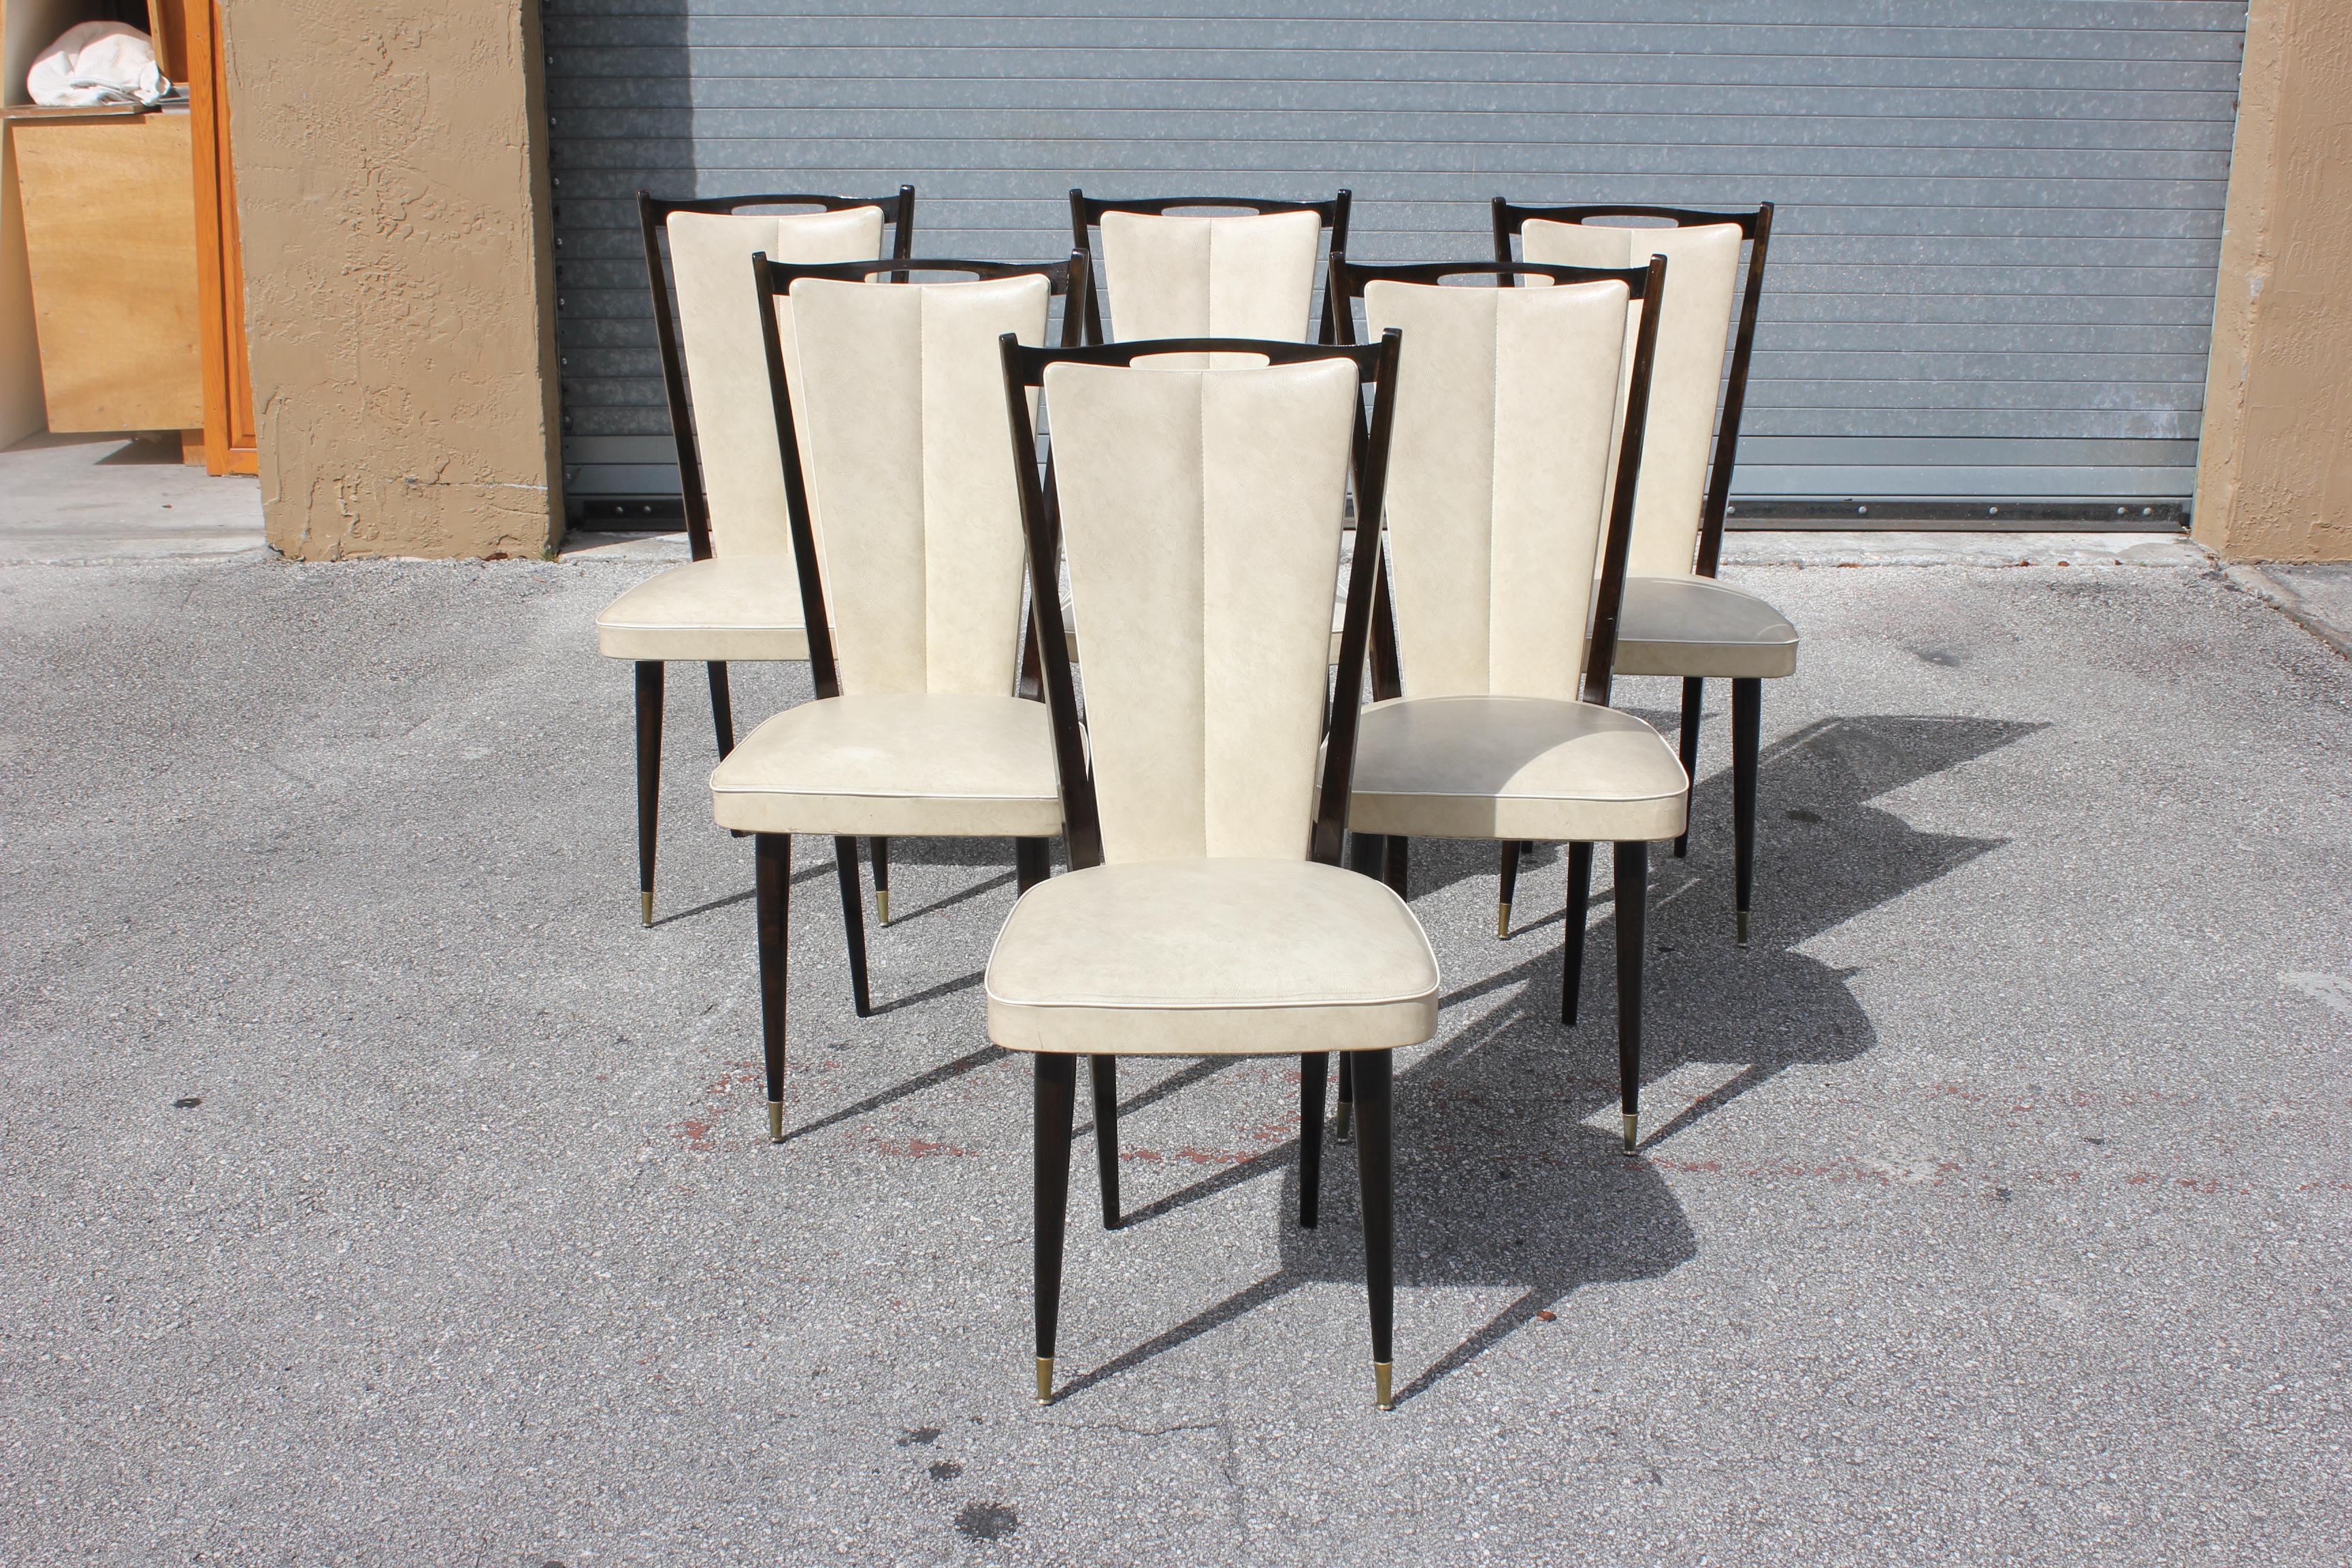 Set of six French Art Deco or Art modern dining chairs solid Mahogany, the chair frames are in excellent condition.(Reupholstery is vinyl recommended to be change for all 6 dining chairs), but the color of the dining chairs are beautiful, circa